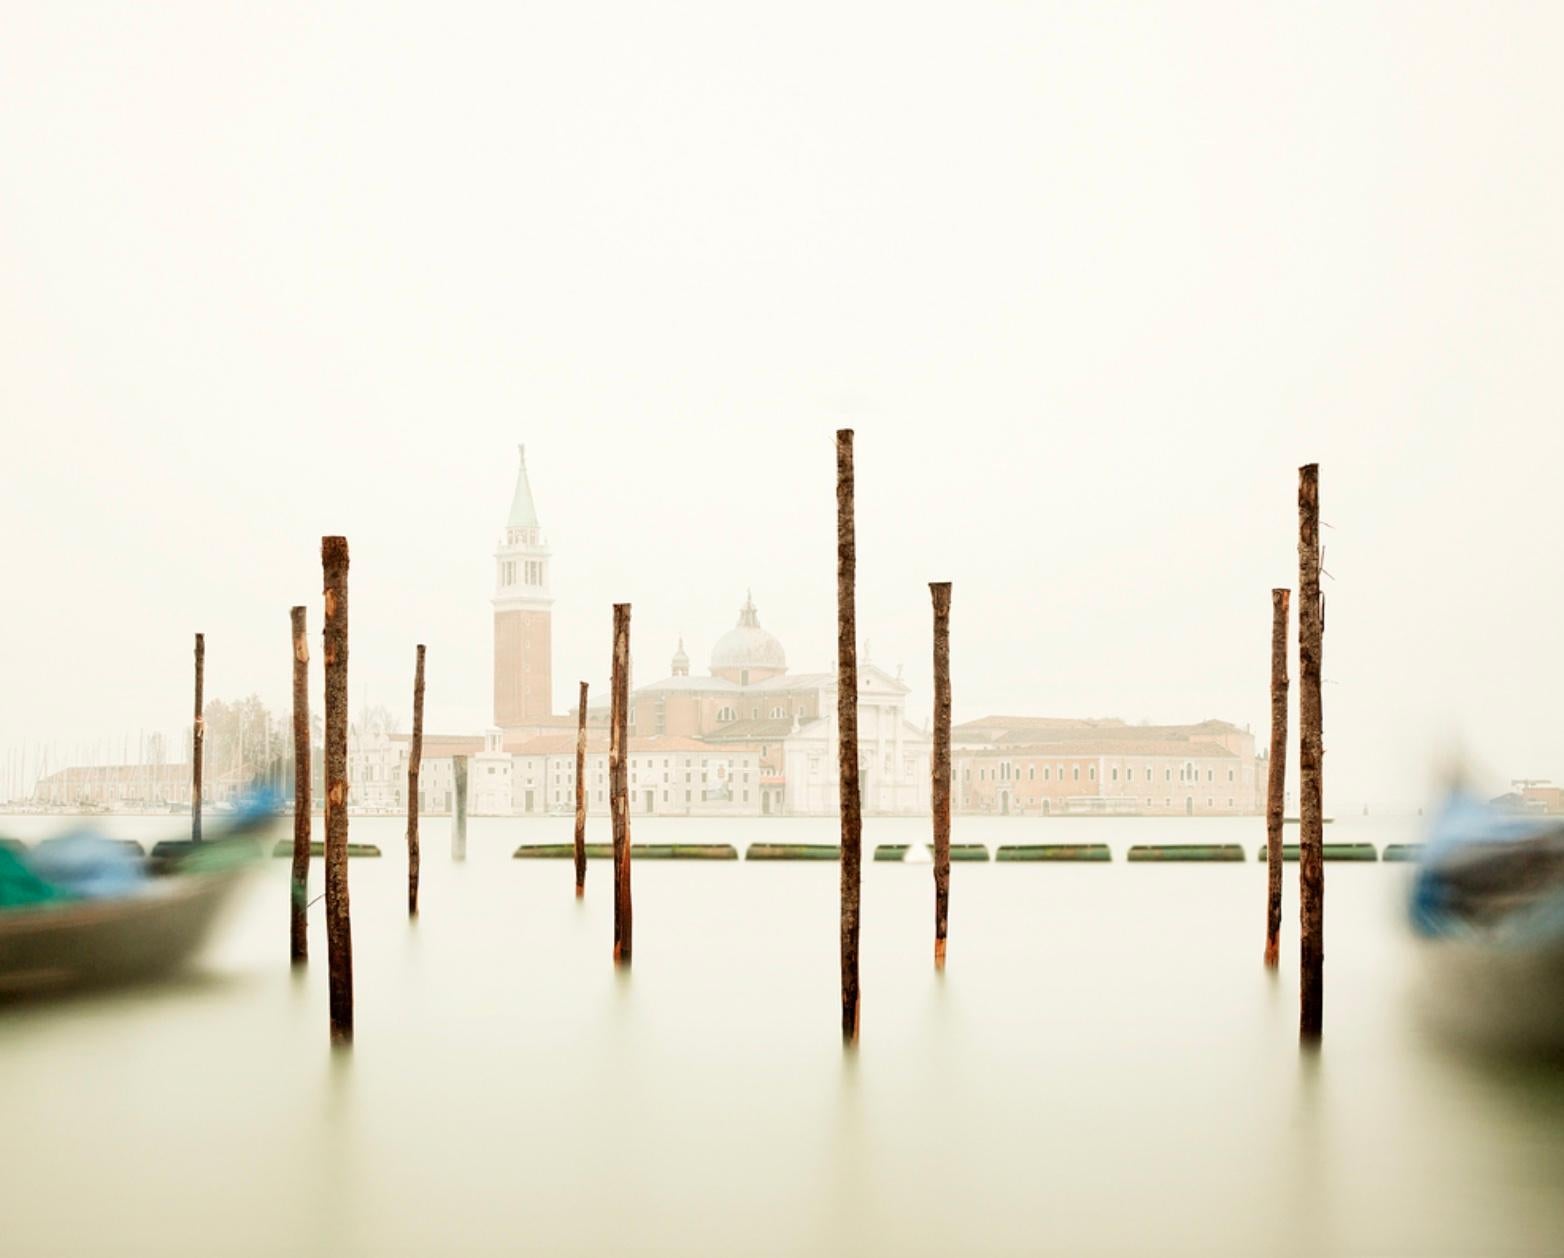 Title: San Giorgio Maggiore with Gondola Station, Venice

David Burdeny (b. 1968. Winnipeg, Canada) graduated with a Masters in Architecture and Interior Design and spent the early part of his career practicing in his field before establishing